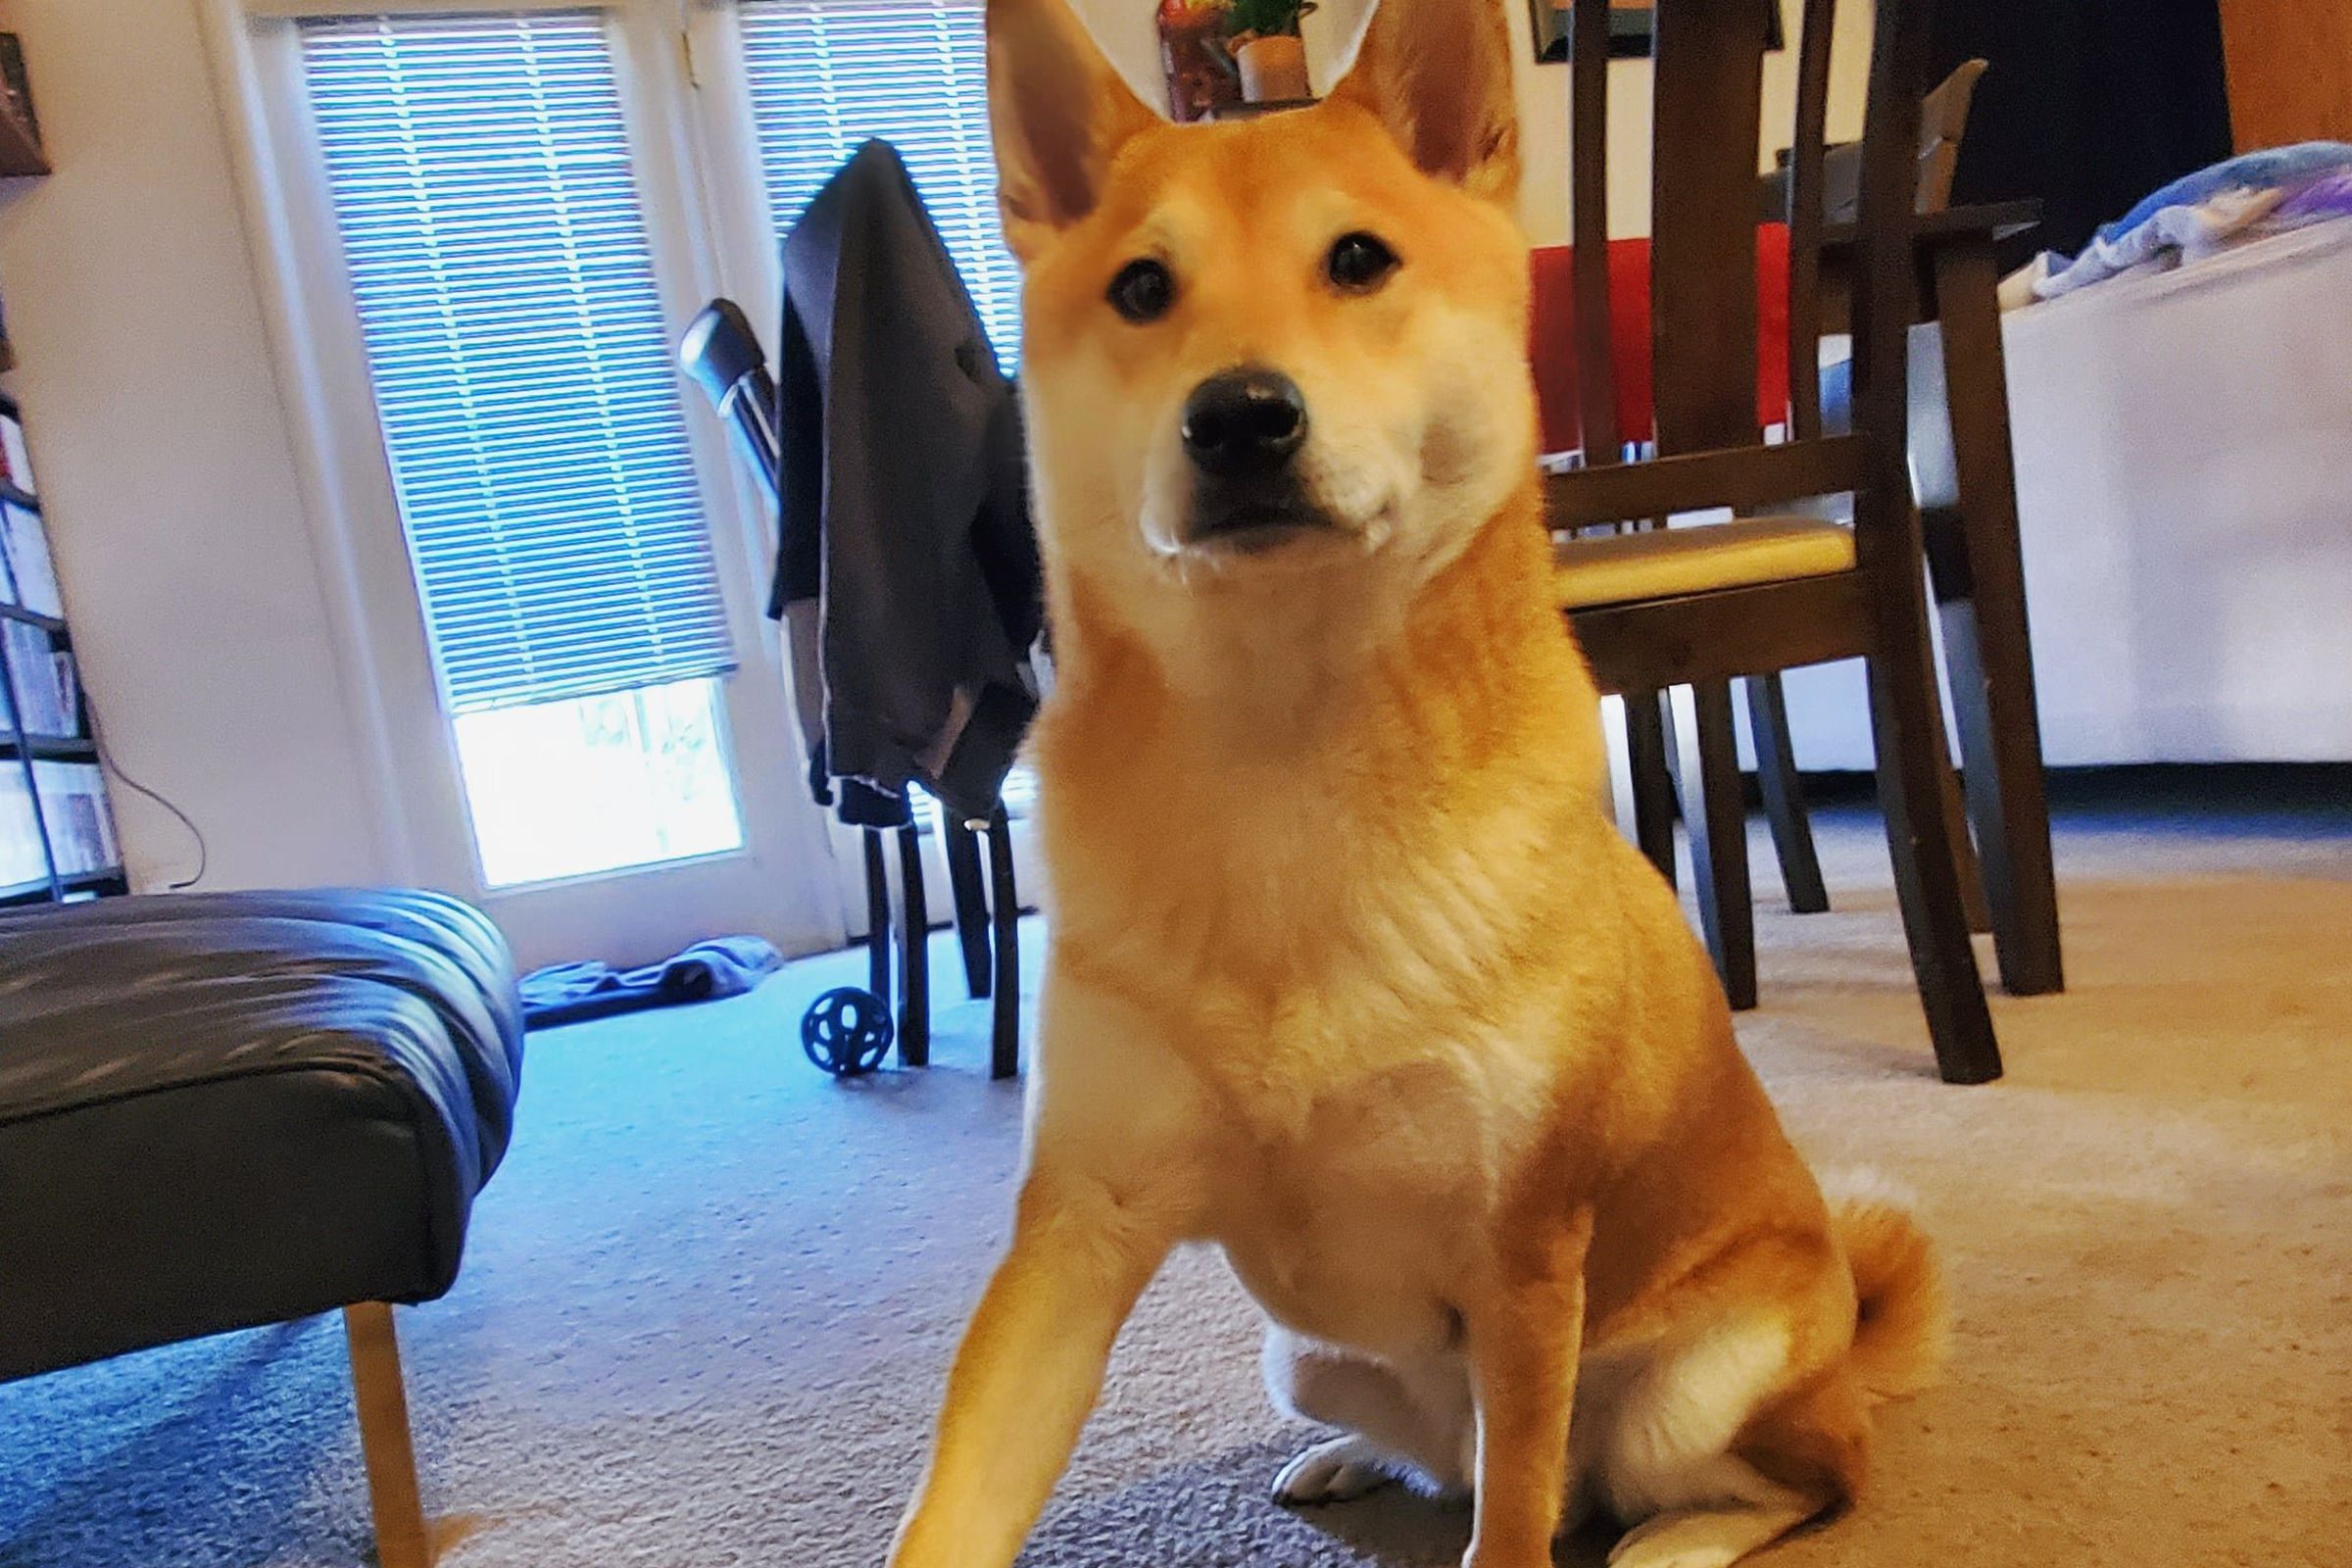 Photo of Peanut Butter, a Shiba Inu, standing with his paw on a custom video game controller made up of blue, red, yellow, and green button pads.